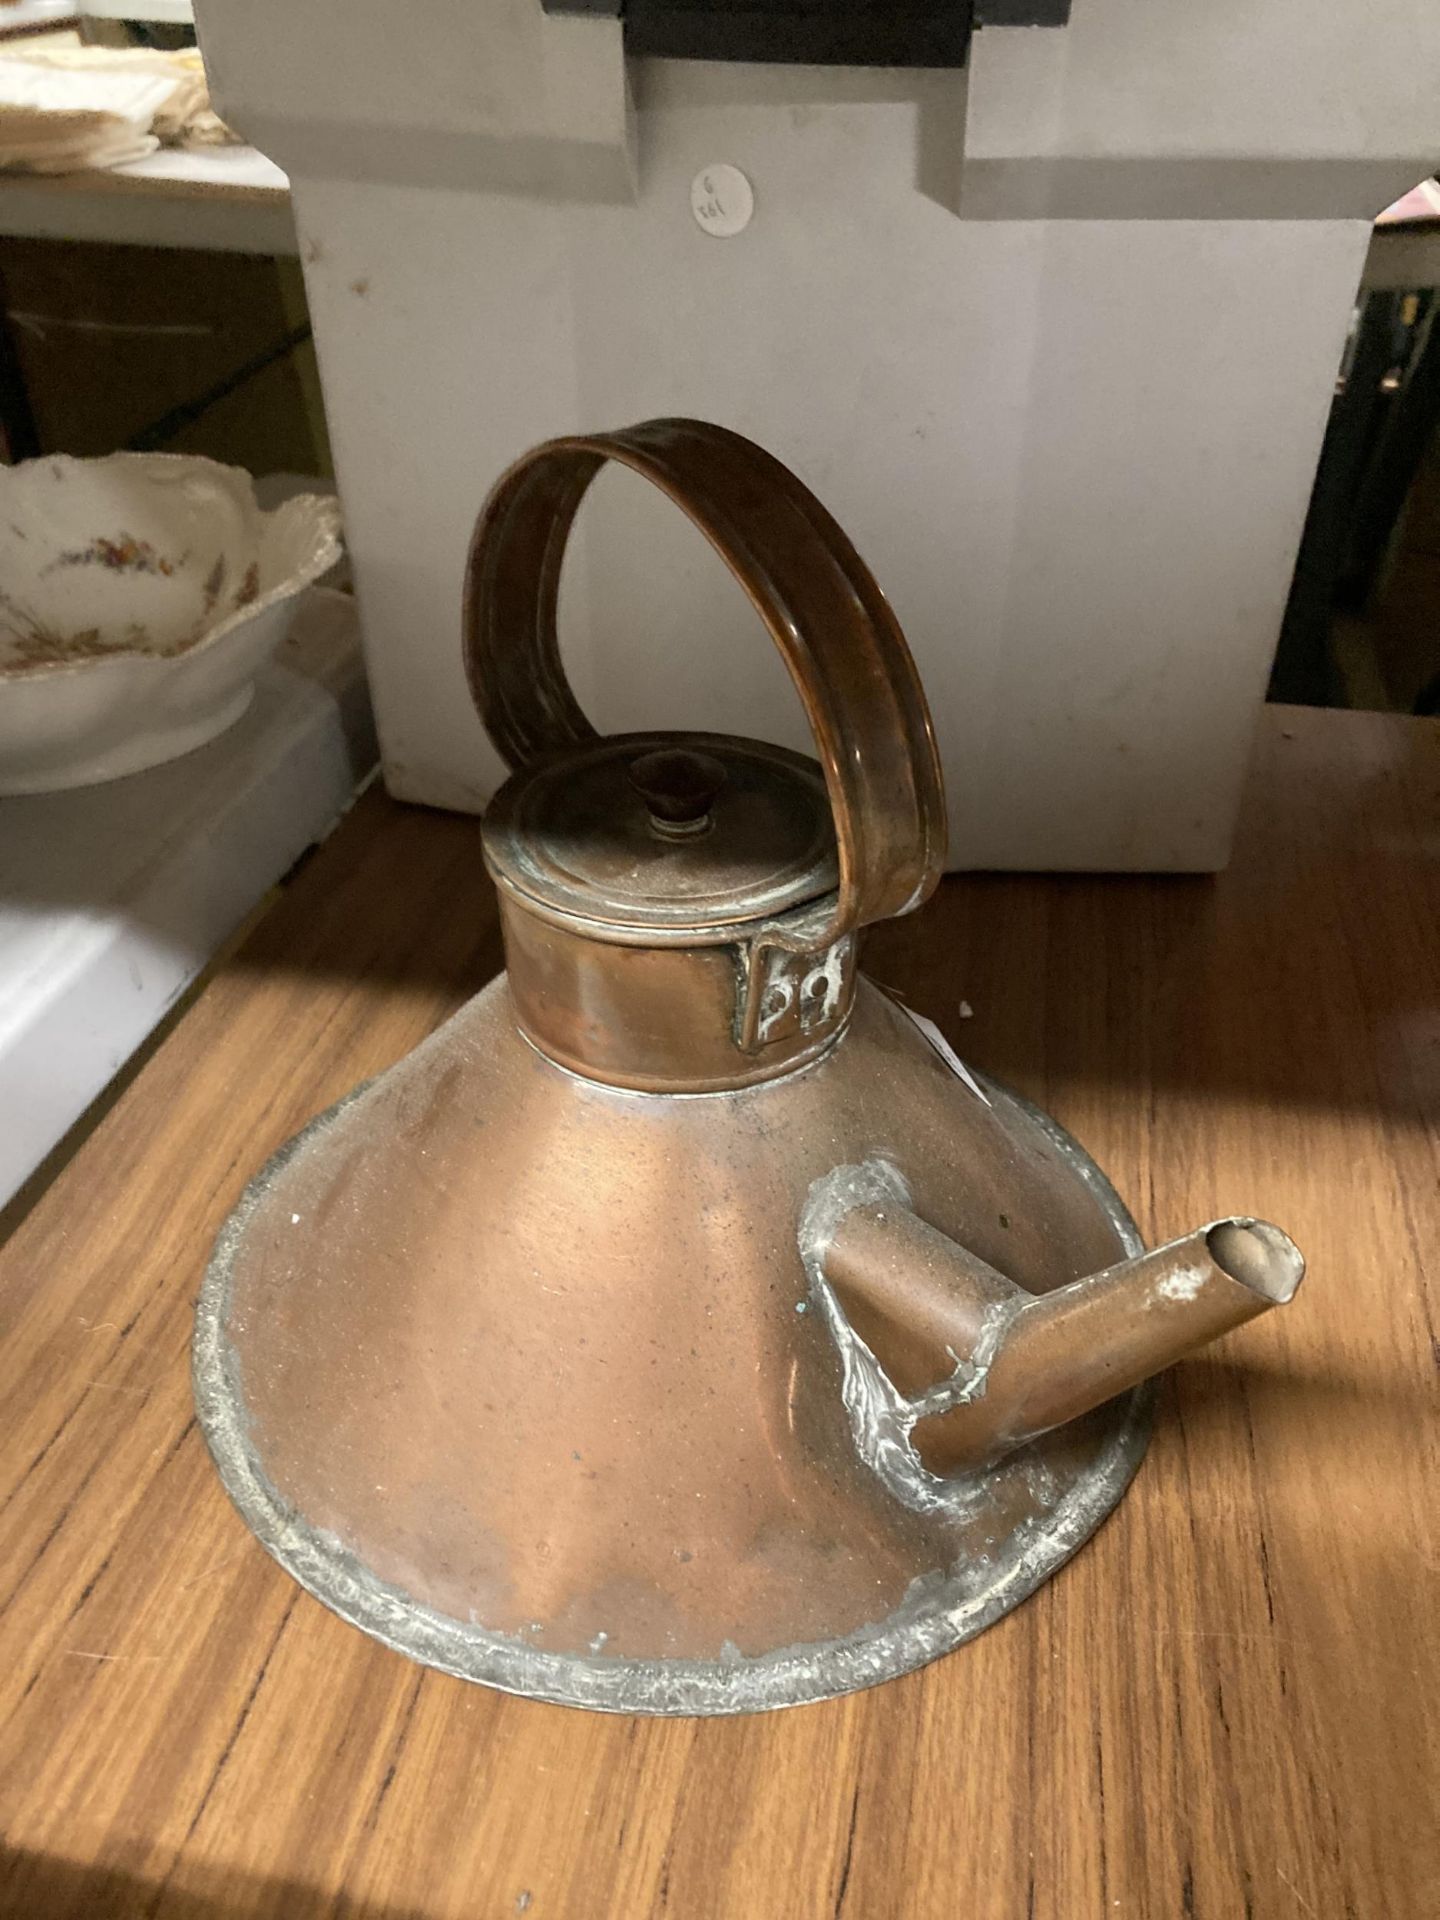 A QUIRKY SHAPED VINTAGE COPPER KETTLE - Image 2 of 2